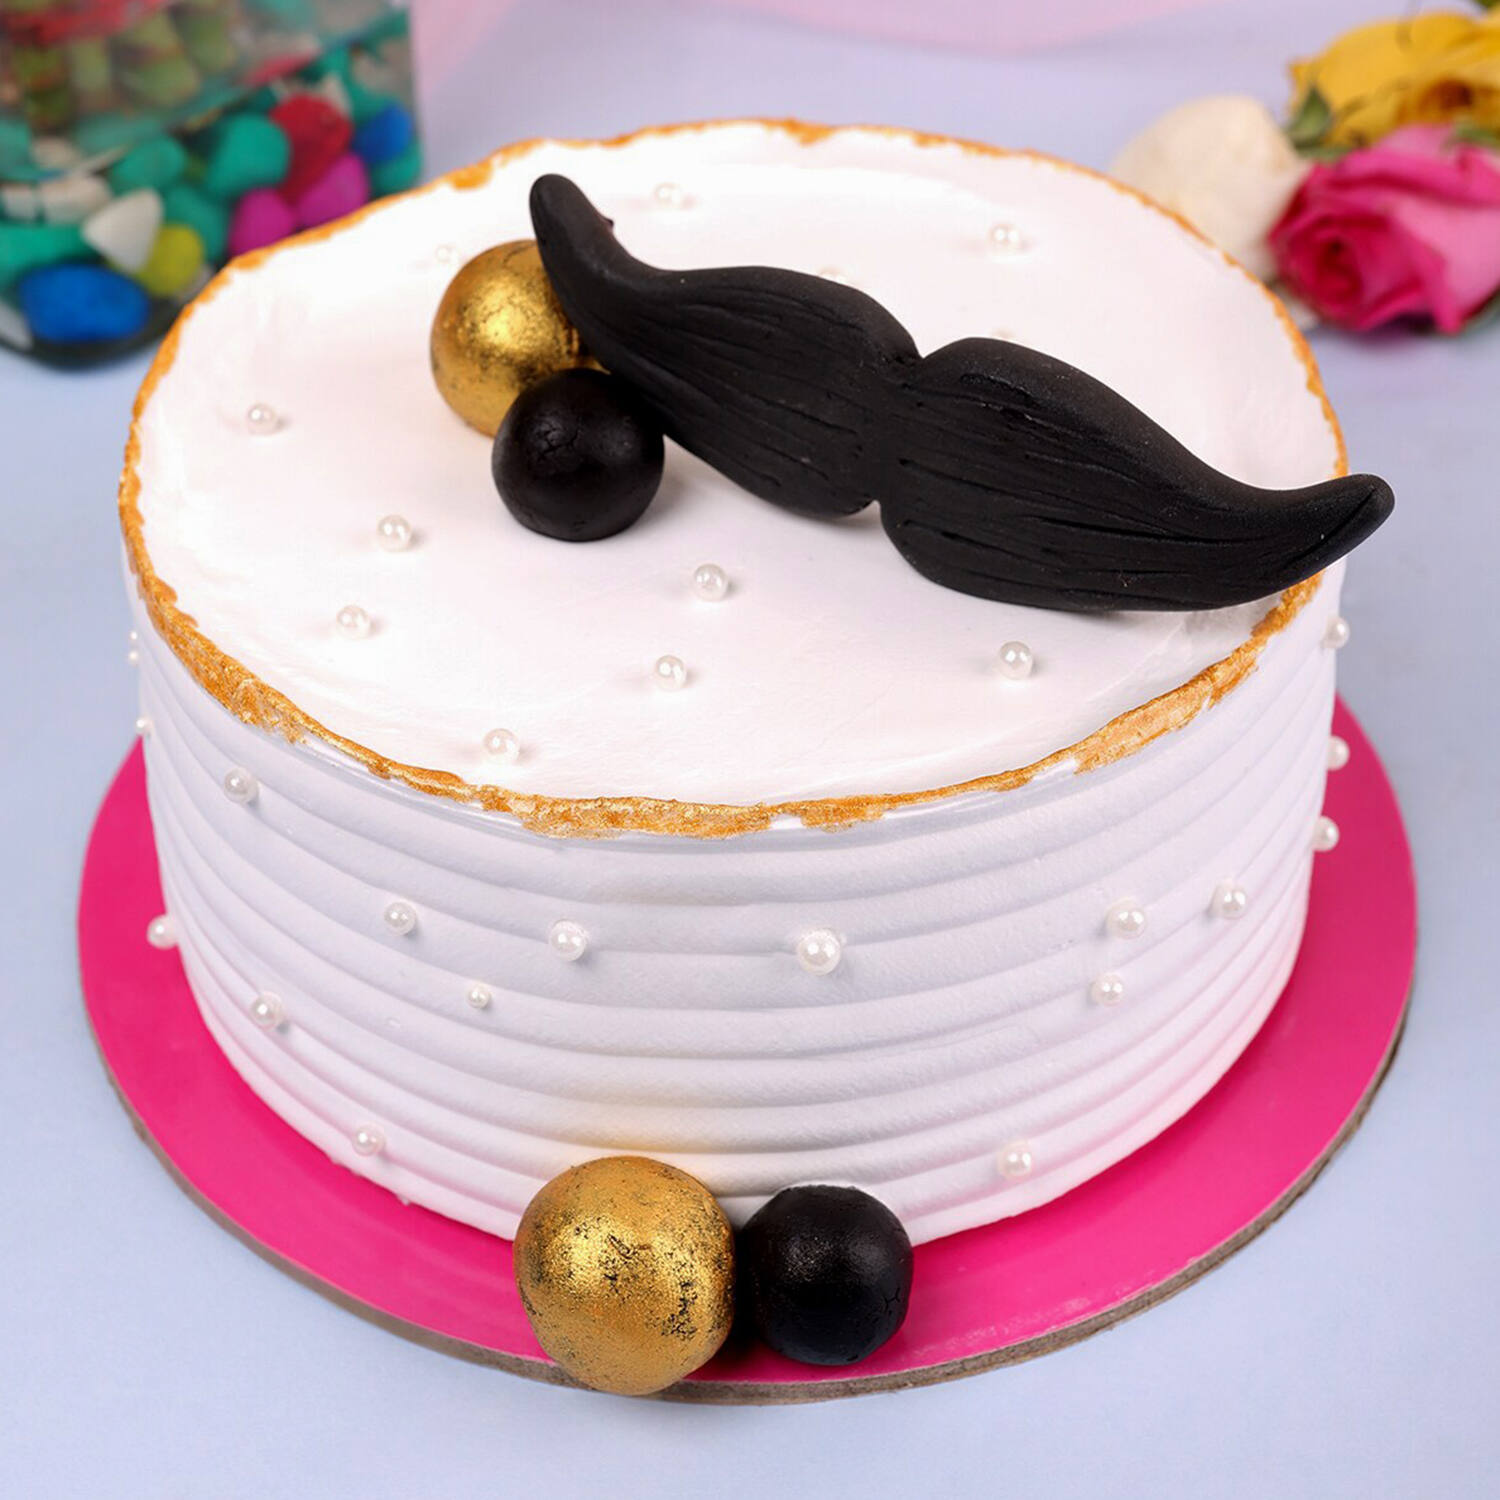 mustache cake | my friends b-day is today. she thinks mustac… | Flickr